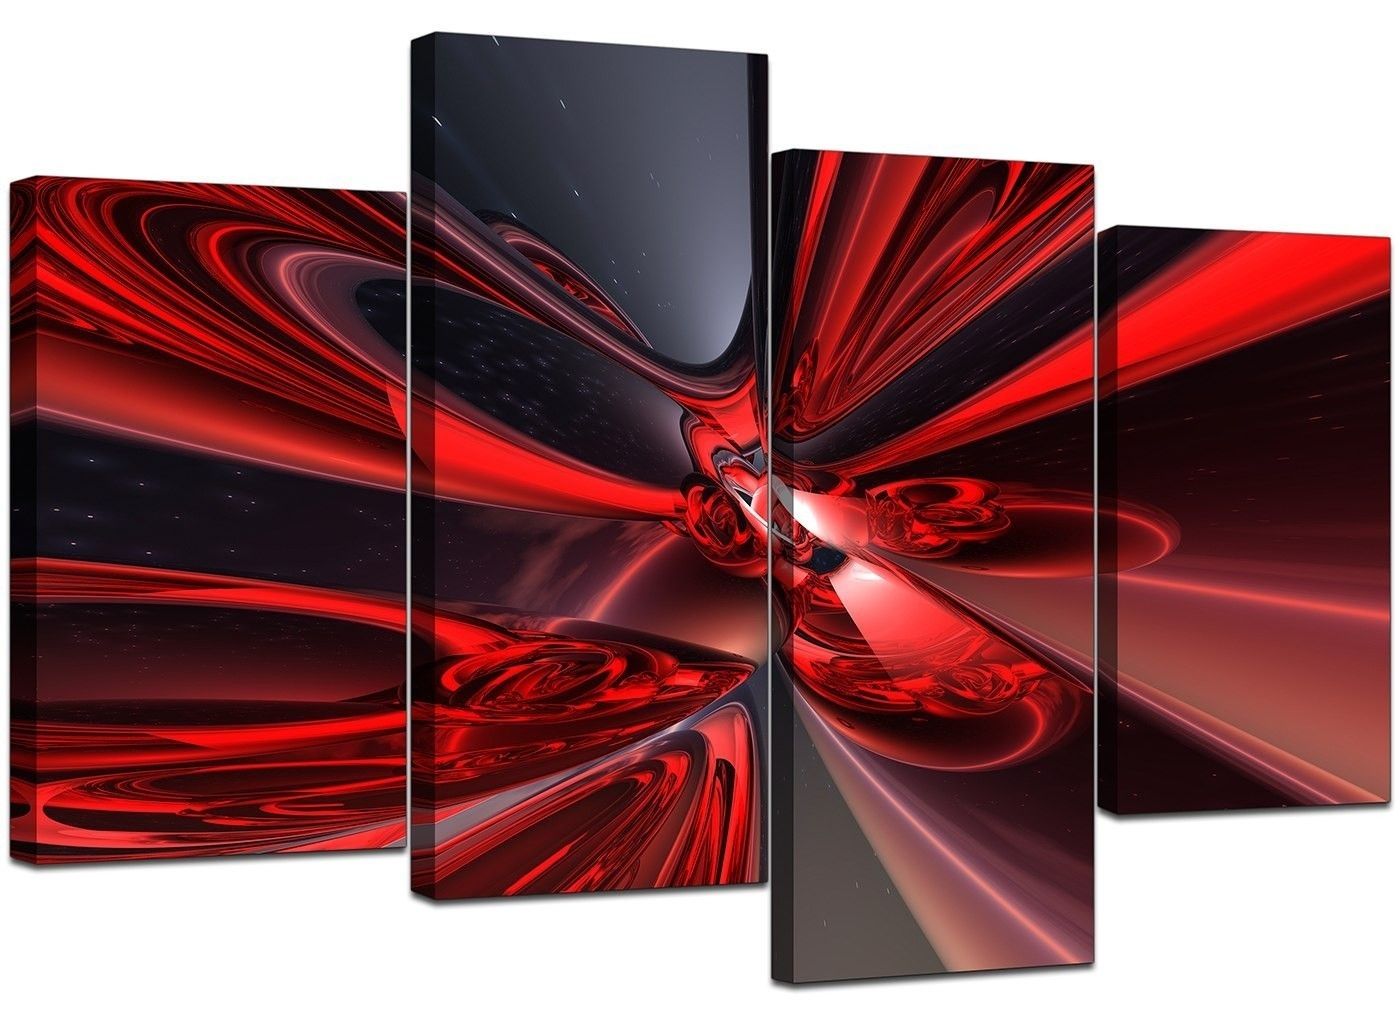 Marvelous Red Abstract Wall Art Elitflat Of And Black Canvas Styles Intended For Red And Black Canvas Wall Art (View 18 of 20)